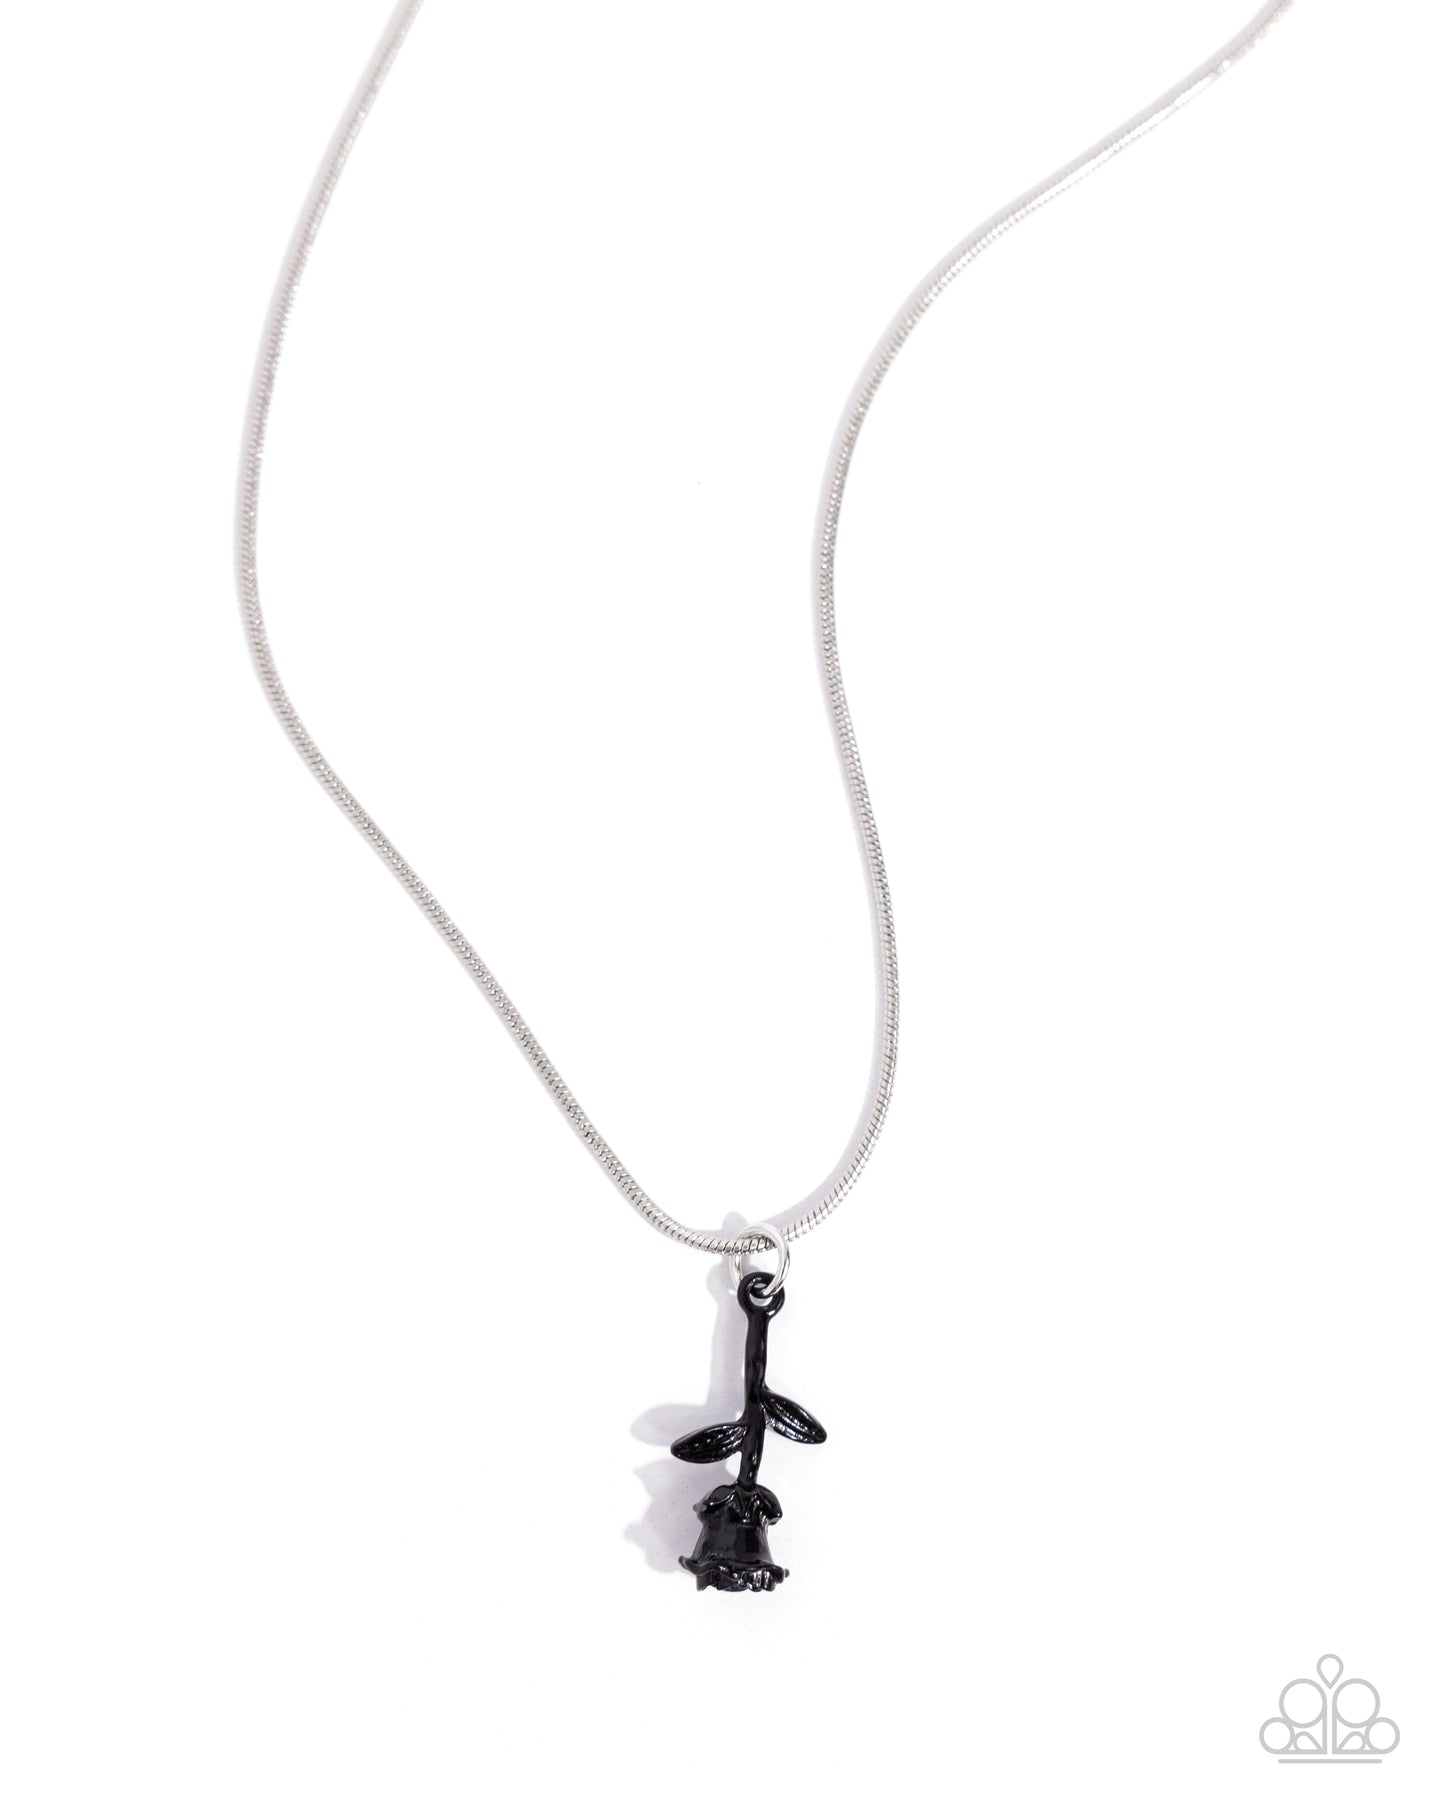 paparazzi-accessories-tippy-rose-black-necklace